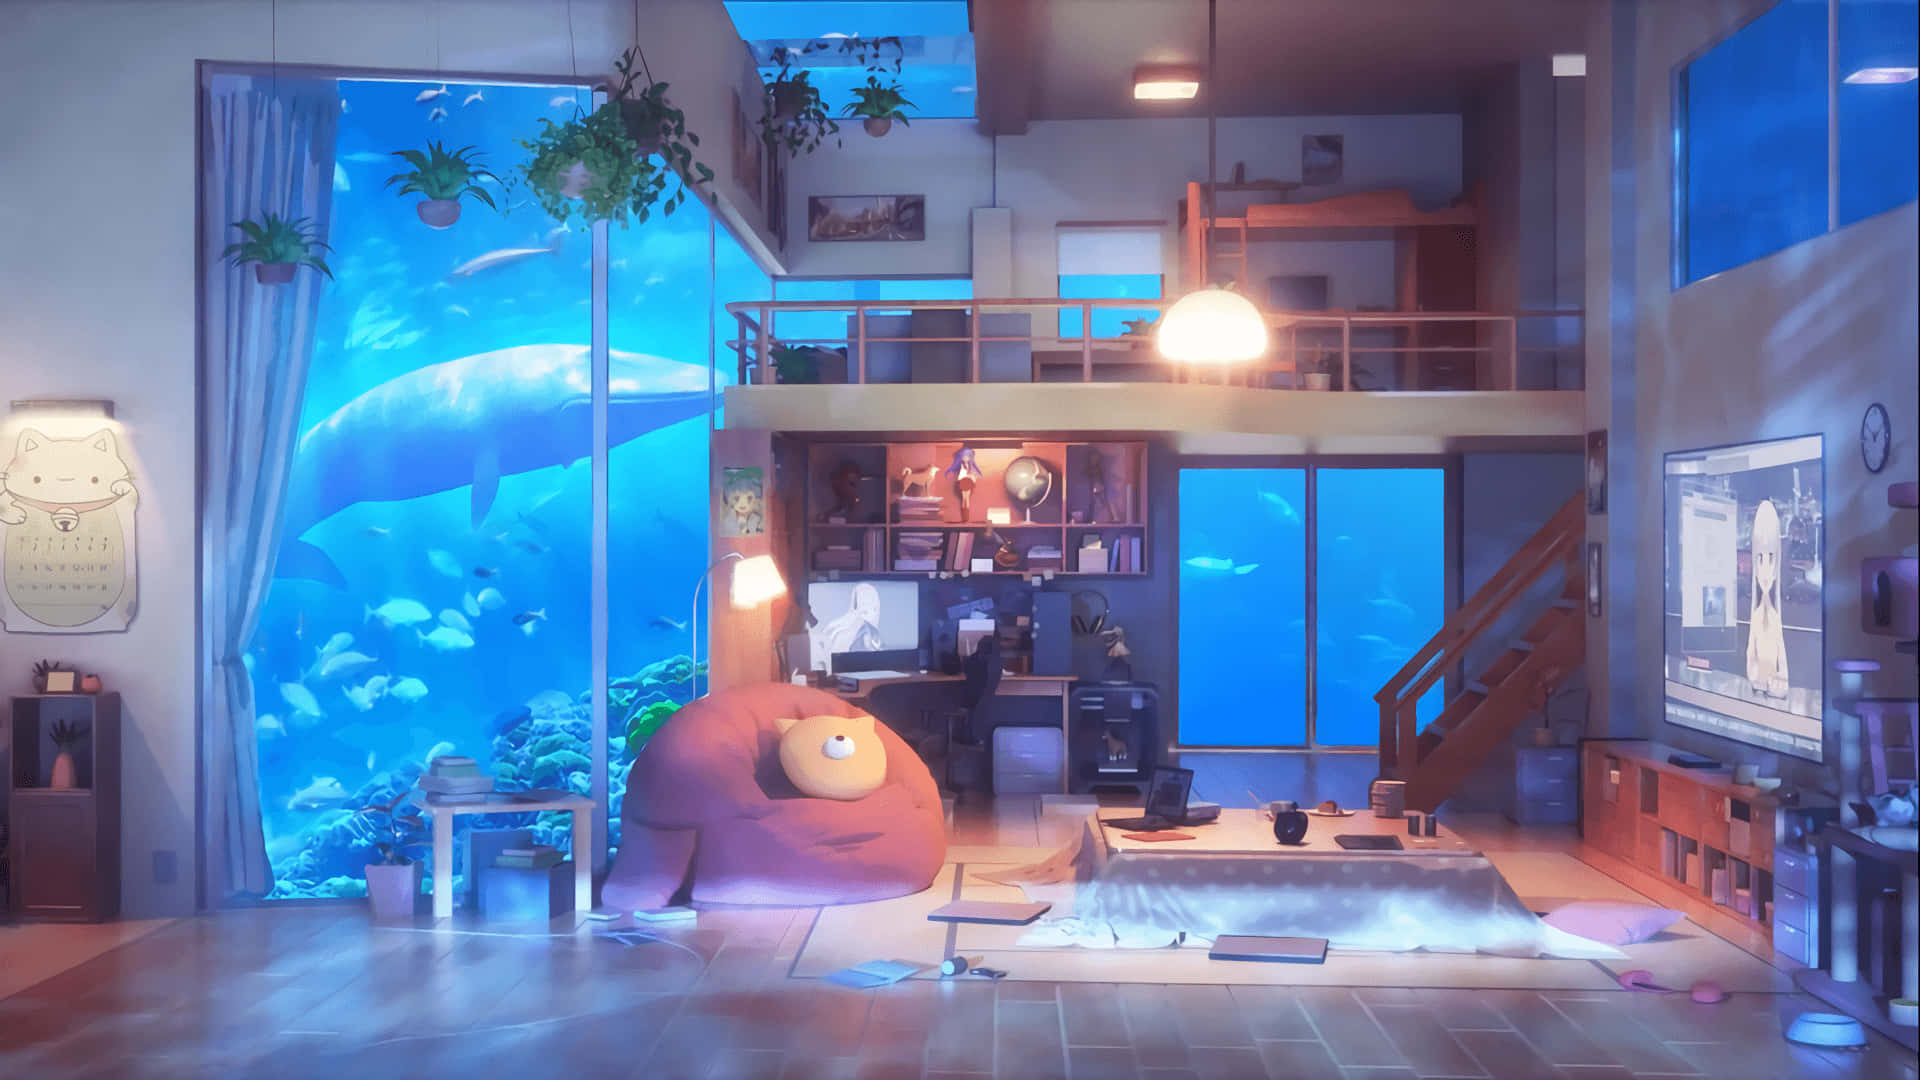 Image  Enjoy a Cozy Night In with Your Favorite Anime Wallpaper